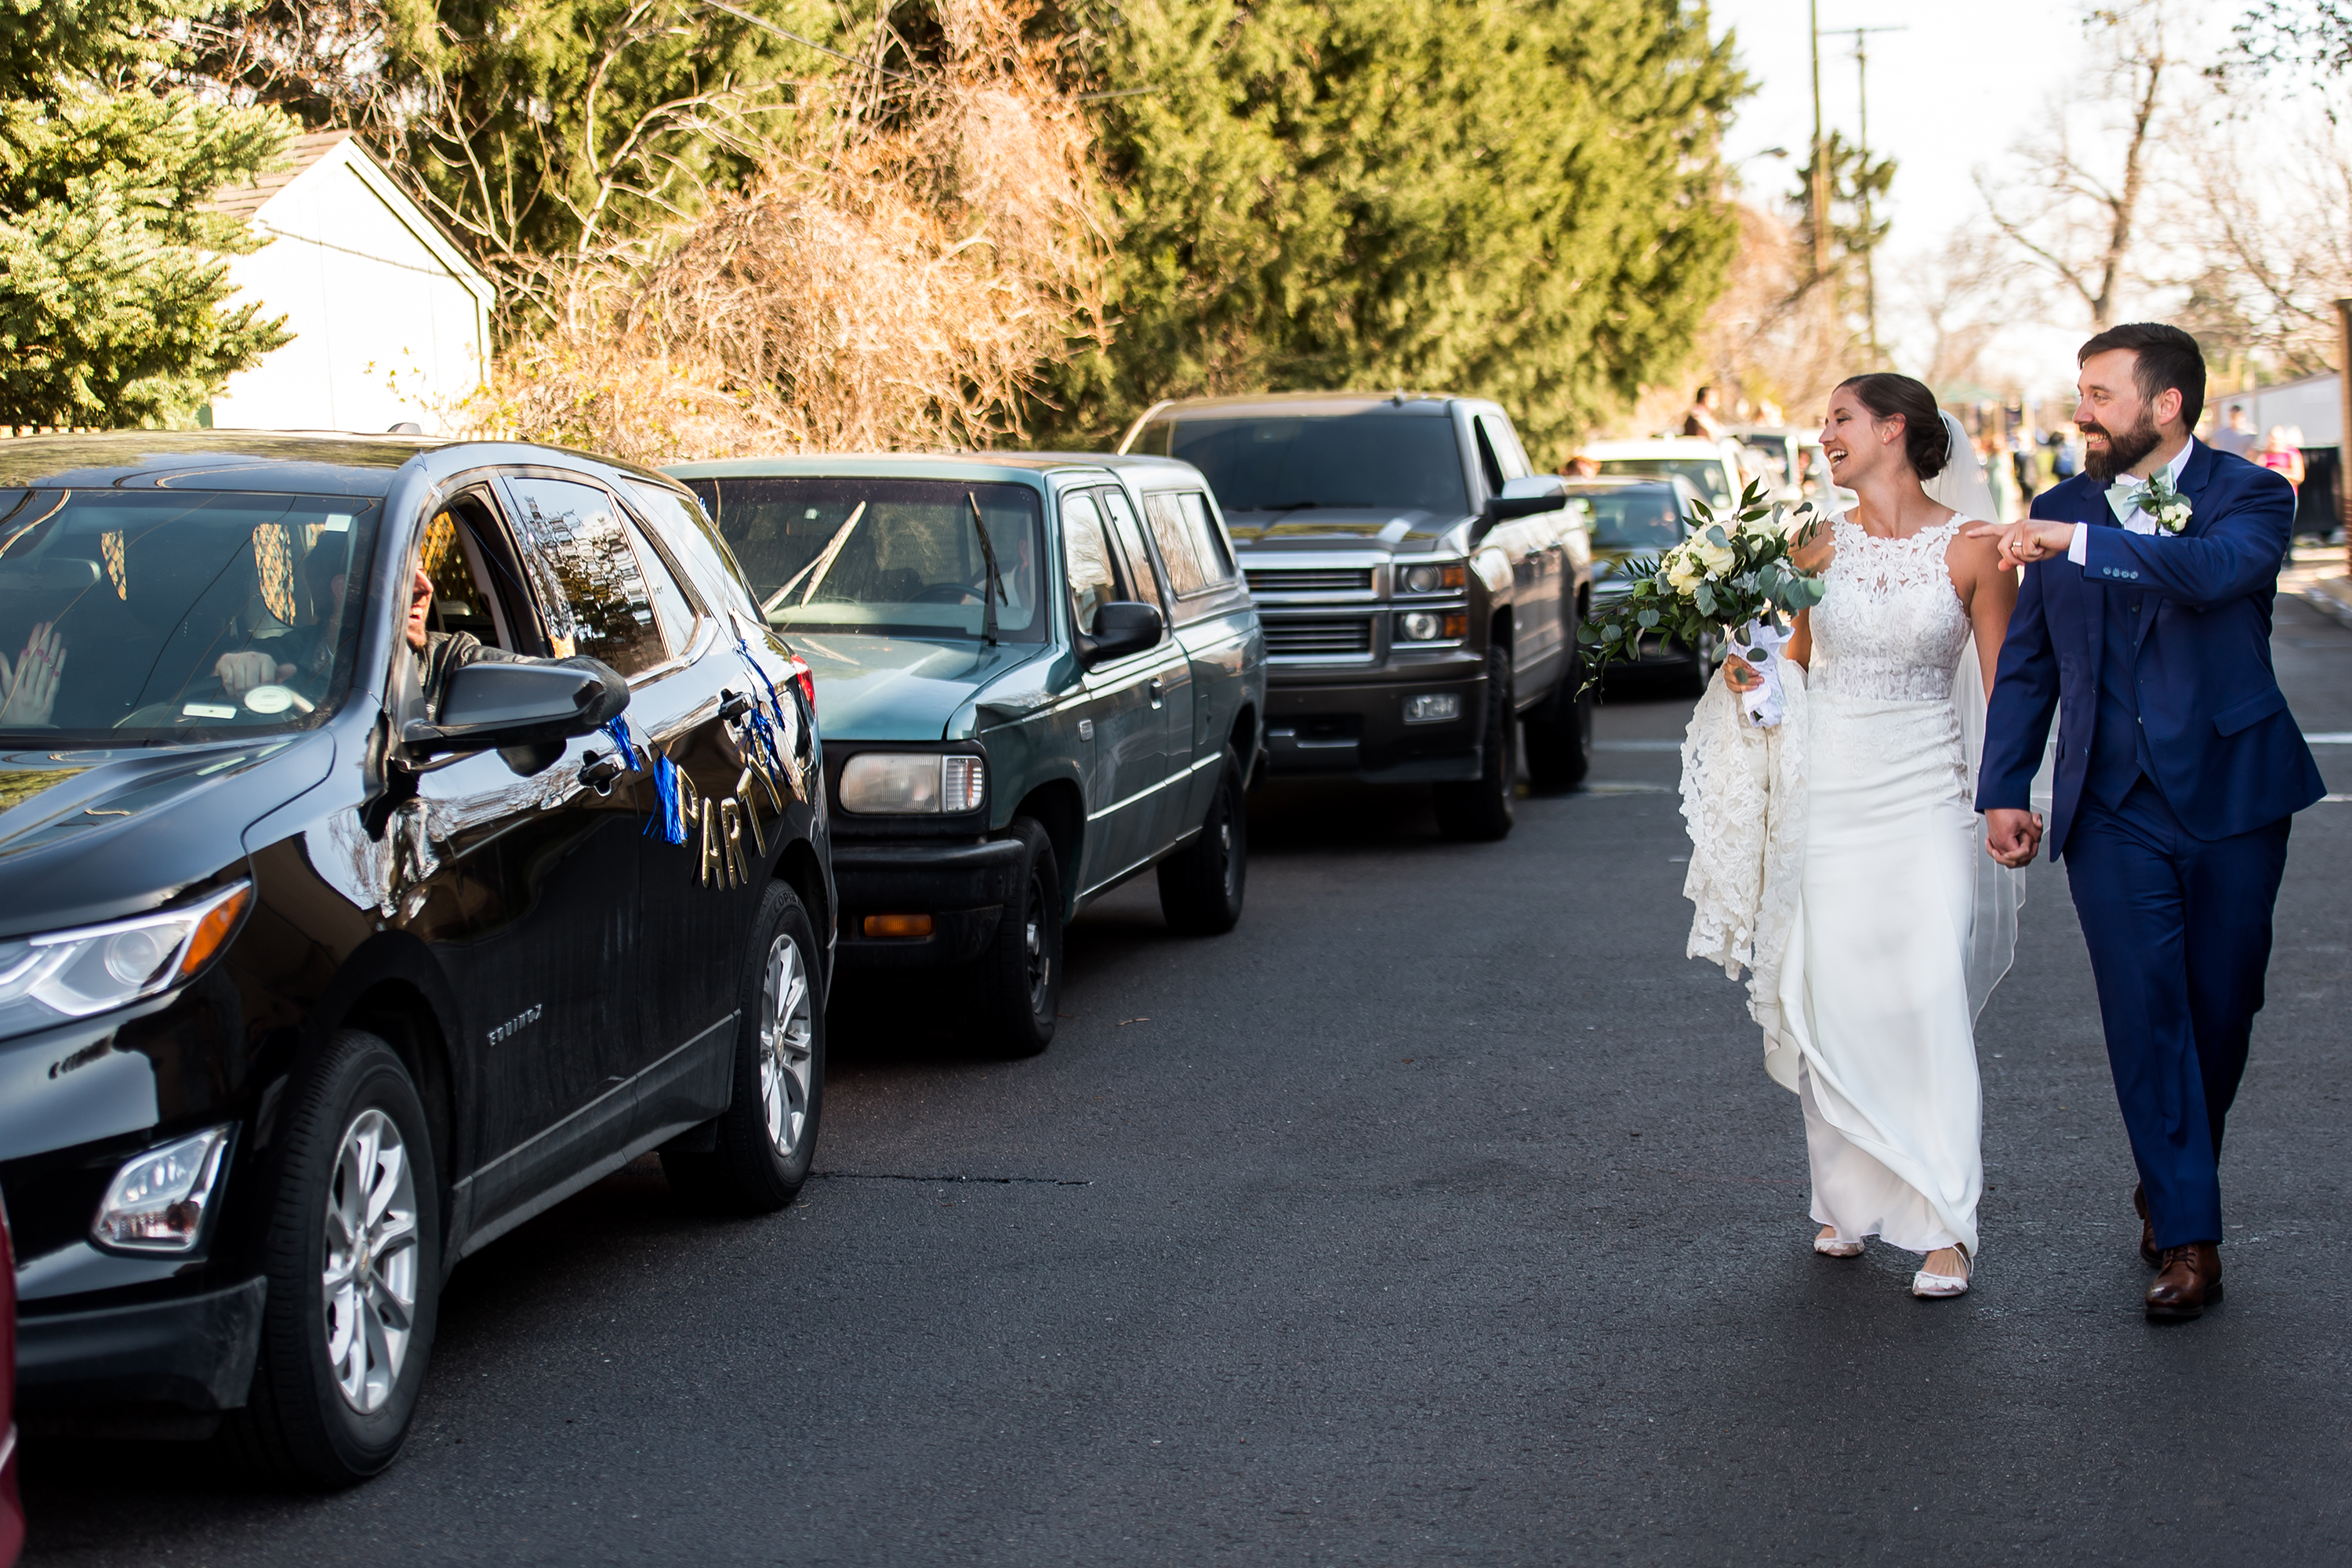 Friends line up in their cars to congratulate bride and groom after their wedding at Our Lady of Lourdes Catholic Church in Denver, Colorado.